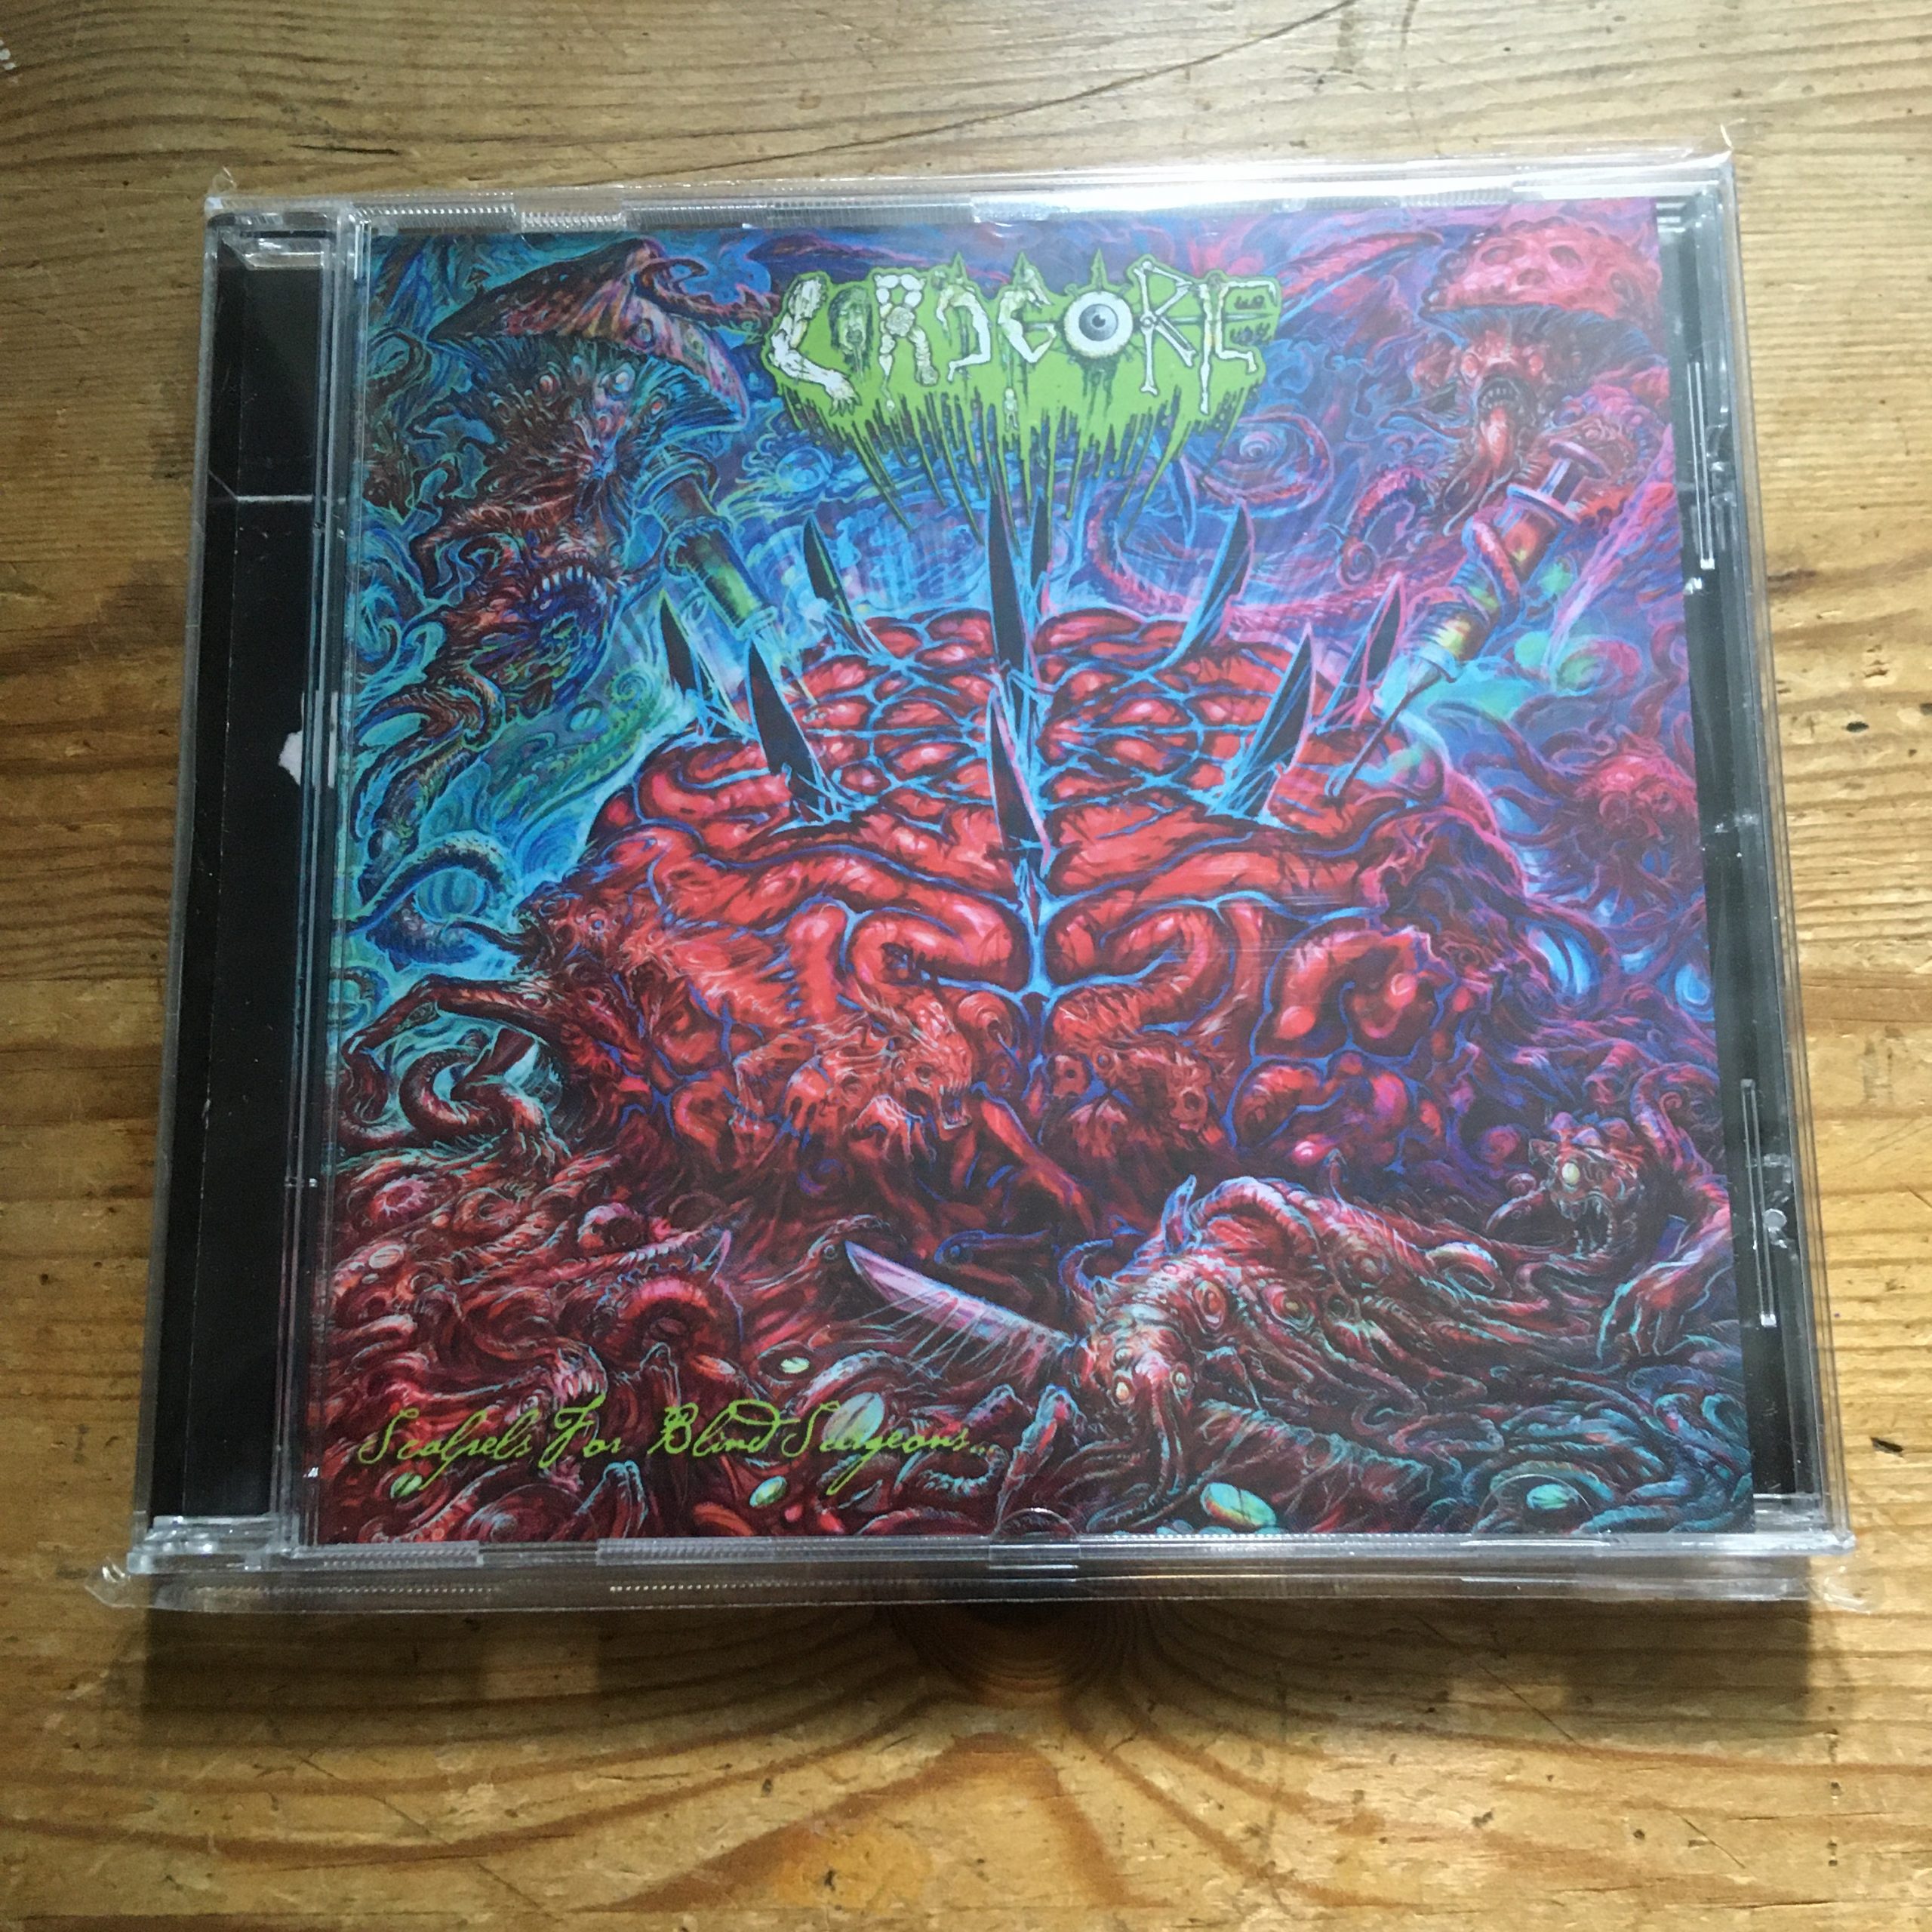 catalogus oplichter tempel Lord Gore - "Scalpels for Blind Surgeons" CD — Extremely Rotten Productions